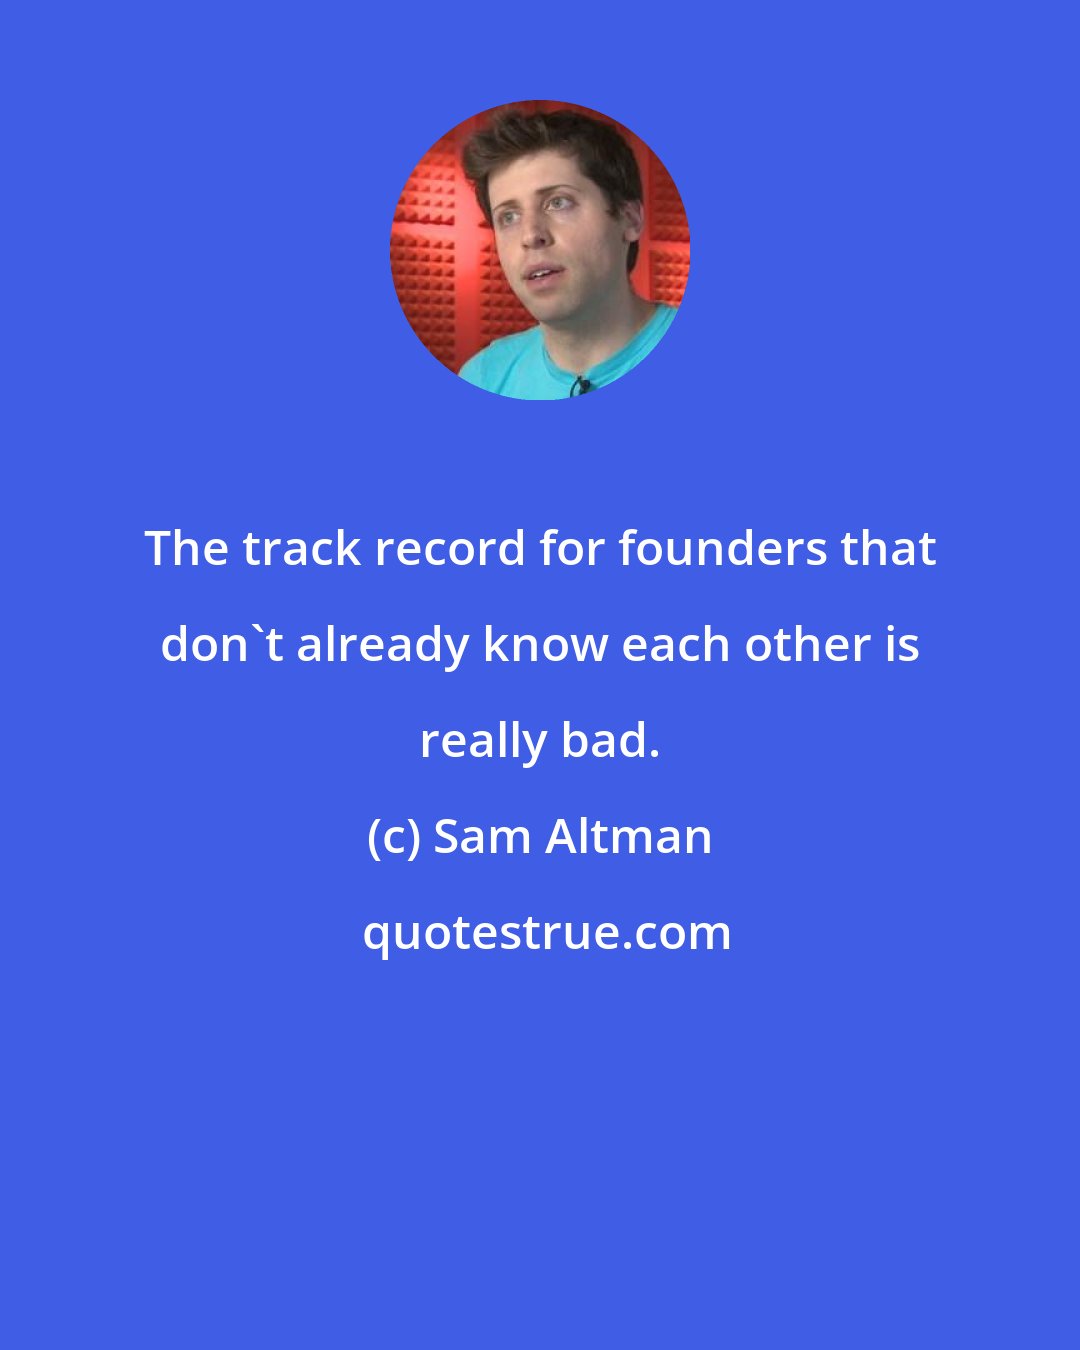 Sam Altman: The track record for founders that don't already know each other is really bad.